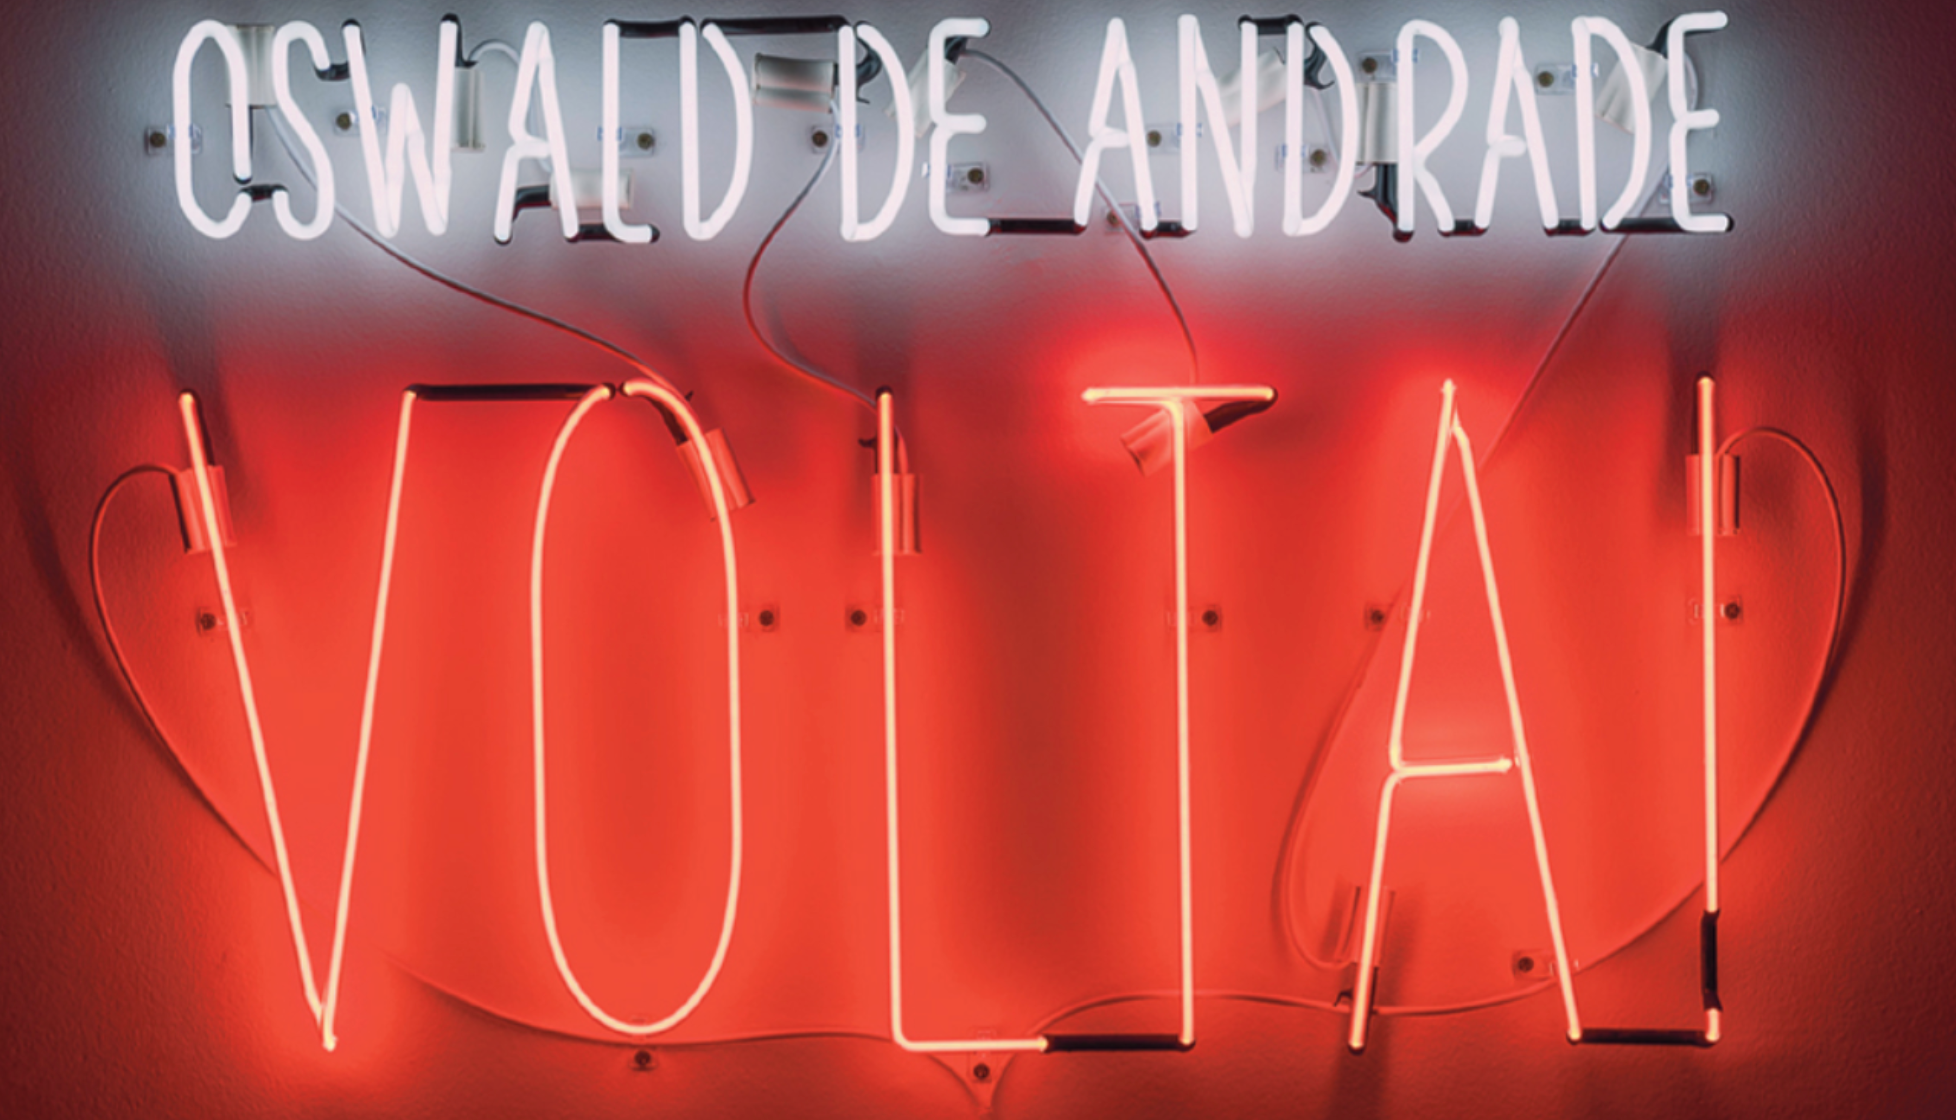 Image from the group show Nuestra América, at Galeria Luisa Strina, on which I wrote one of the essays for Artforum - the neon image reads, "Oswaldo de Andrade, Volta!" / "Oswaldo de Andrade, Come Back!"